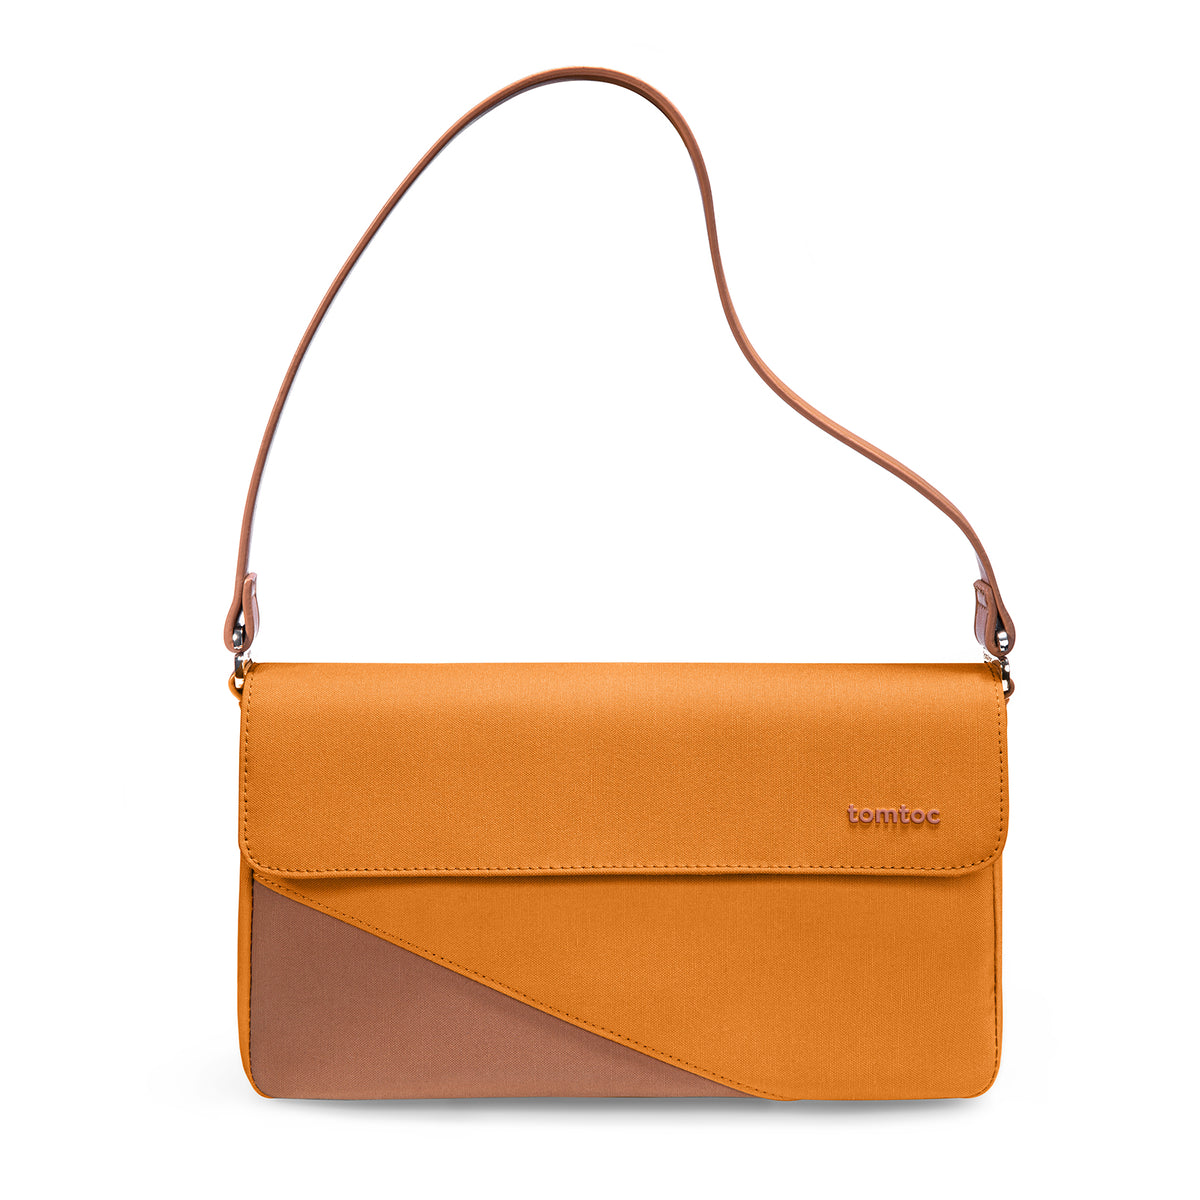 primary_The Her-A0203 Switch Daily Bag